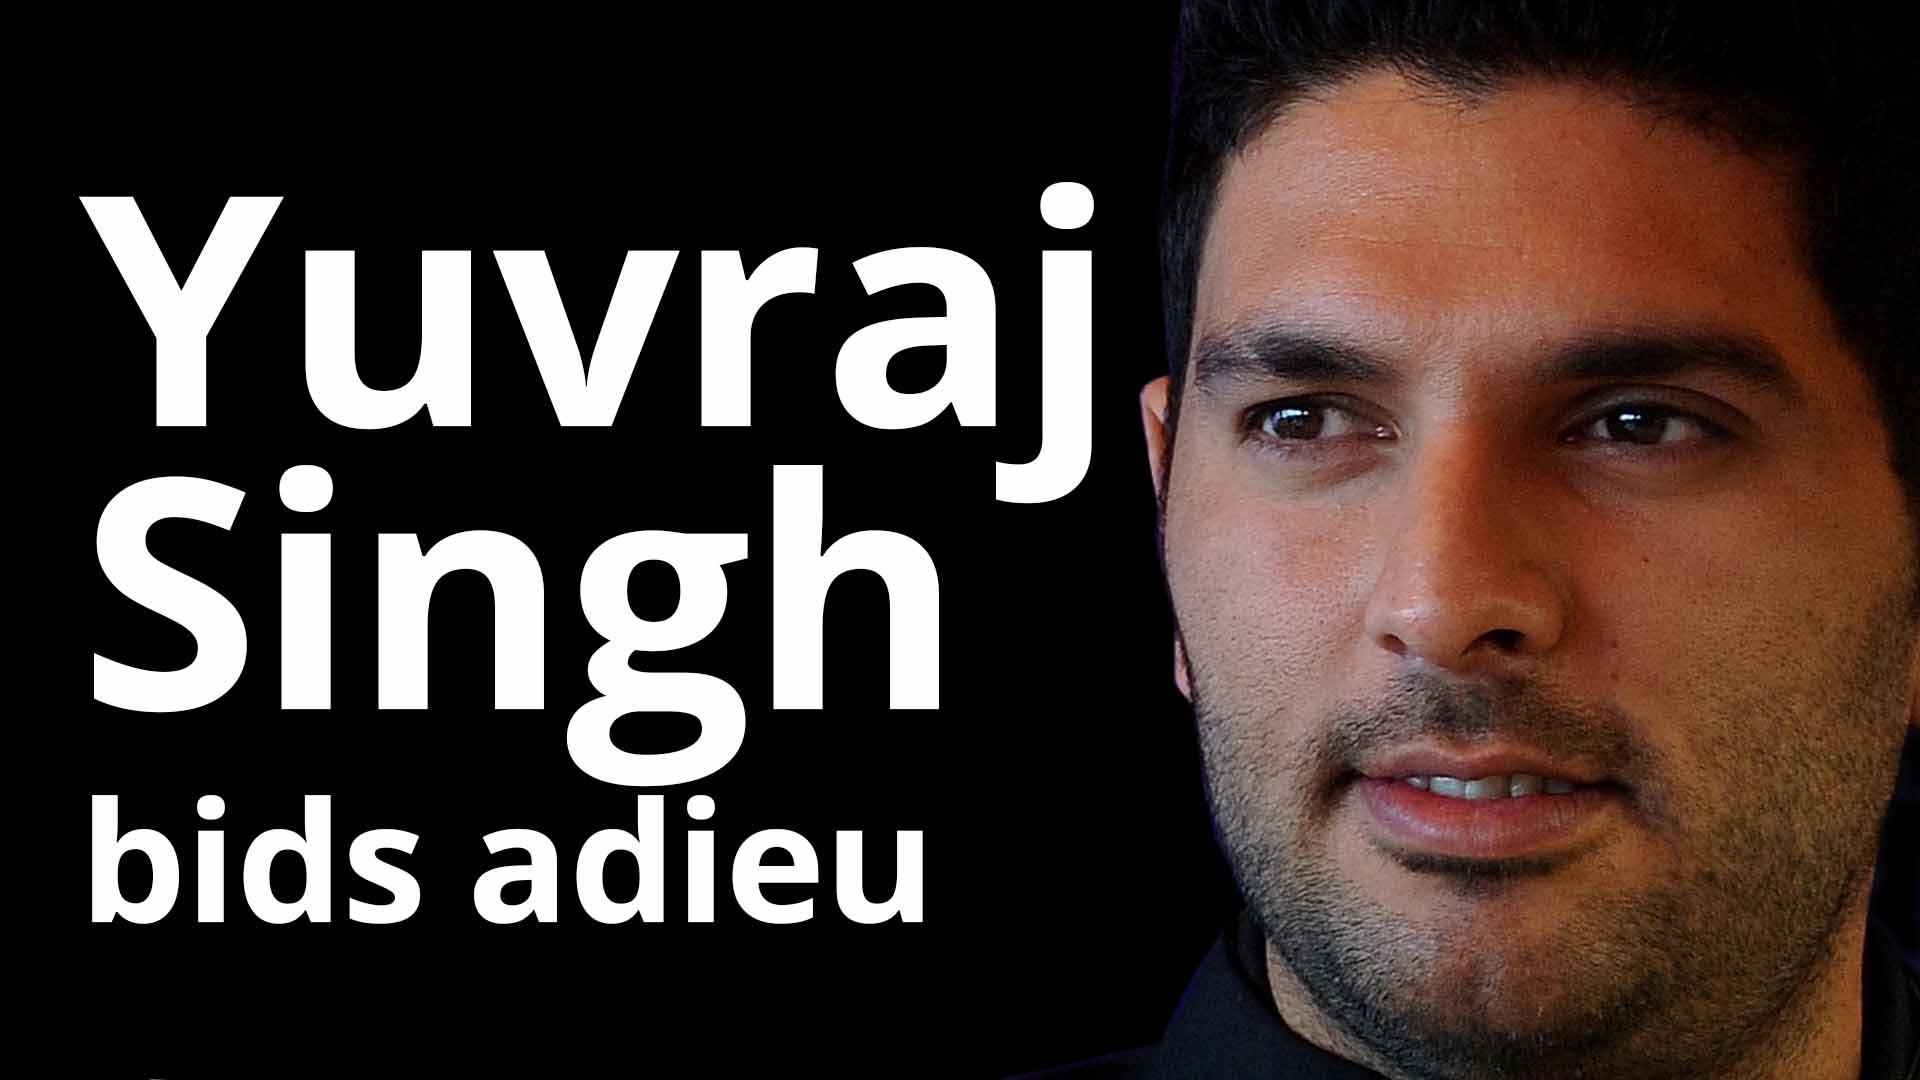 Its time to move on, says Yuvraj Singh as he retires